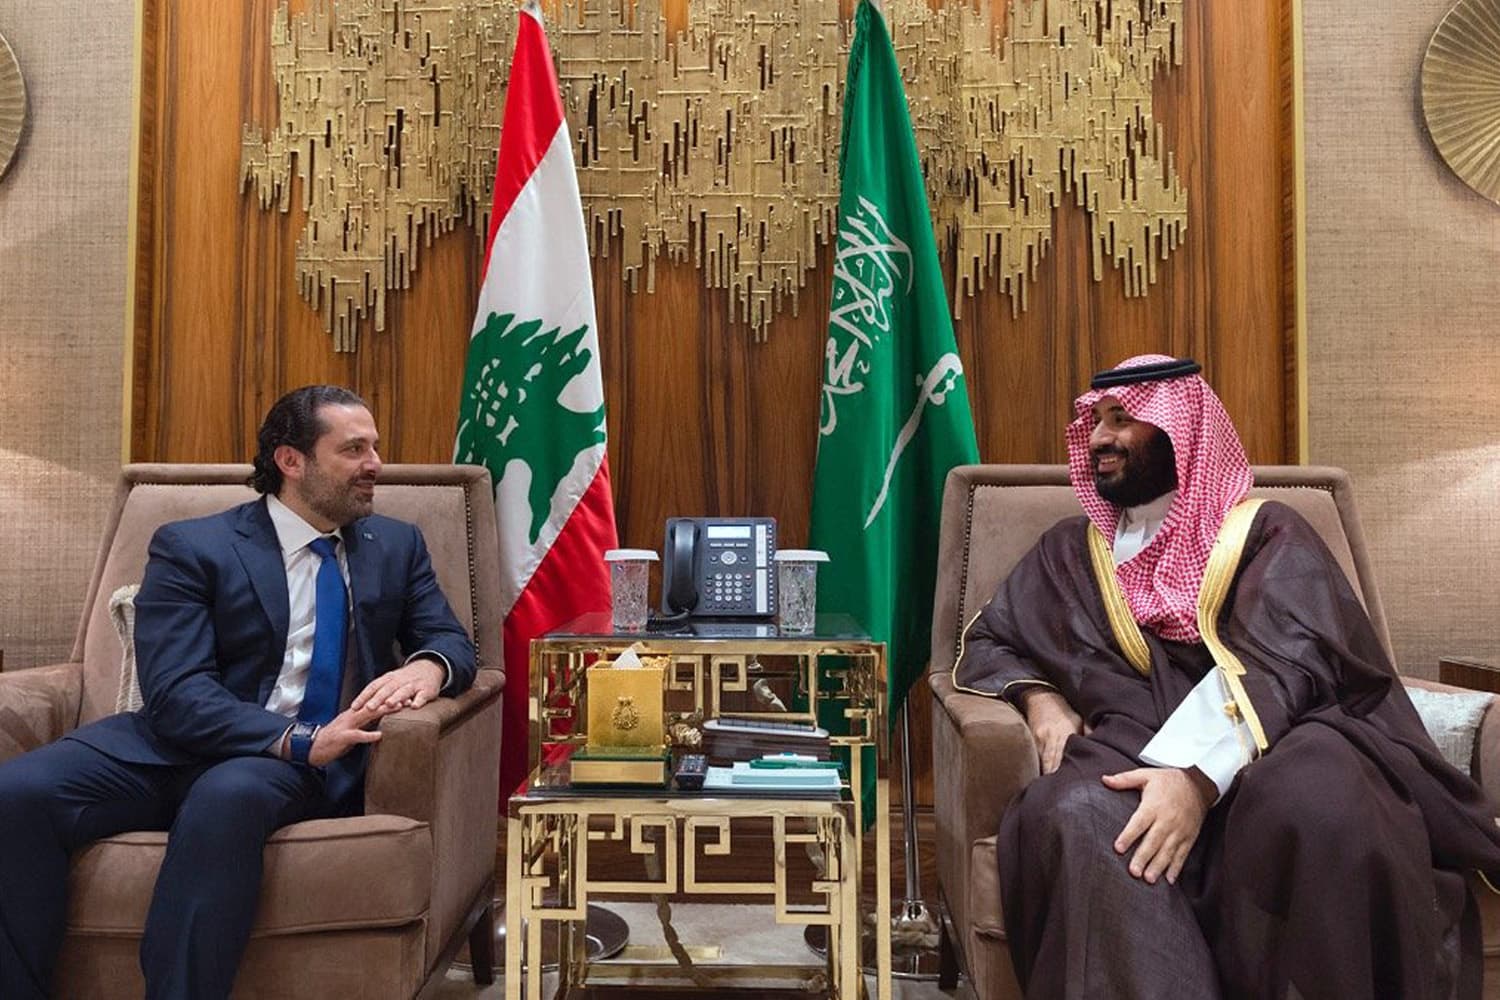 In this Monday, Oct. 30, 2017 file photo, released by Lebanon's official government photographer Saudi Crown Prince Mohammed bin Salman, right, meets with Lebanese Prime Minister Saad Hariri in Riyadh, Saudi Arabia. (Dalati Nohra via AP, File)